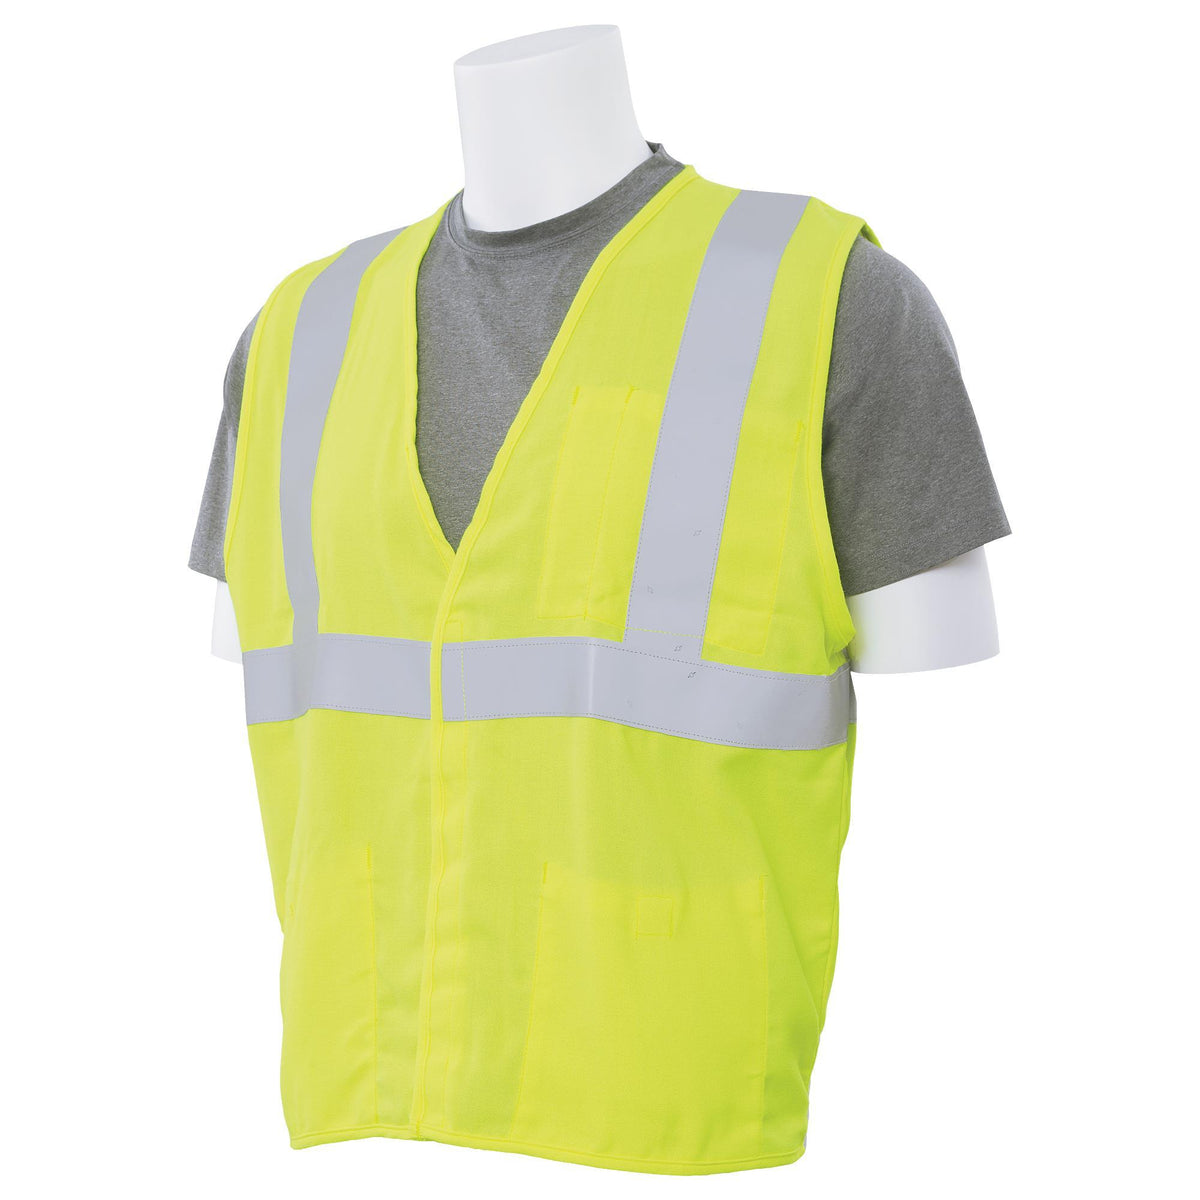 IFR150 Class 2 Inherently Flame Resistant Safety Vest 1PC